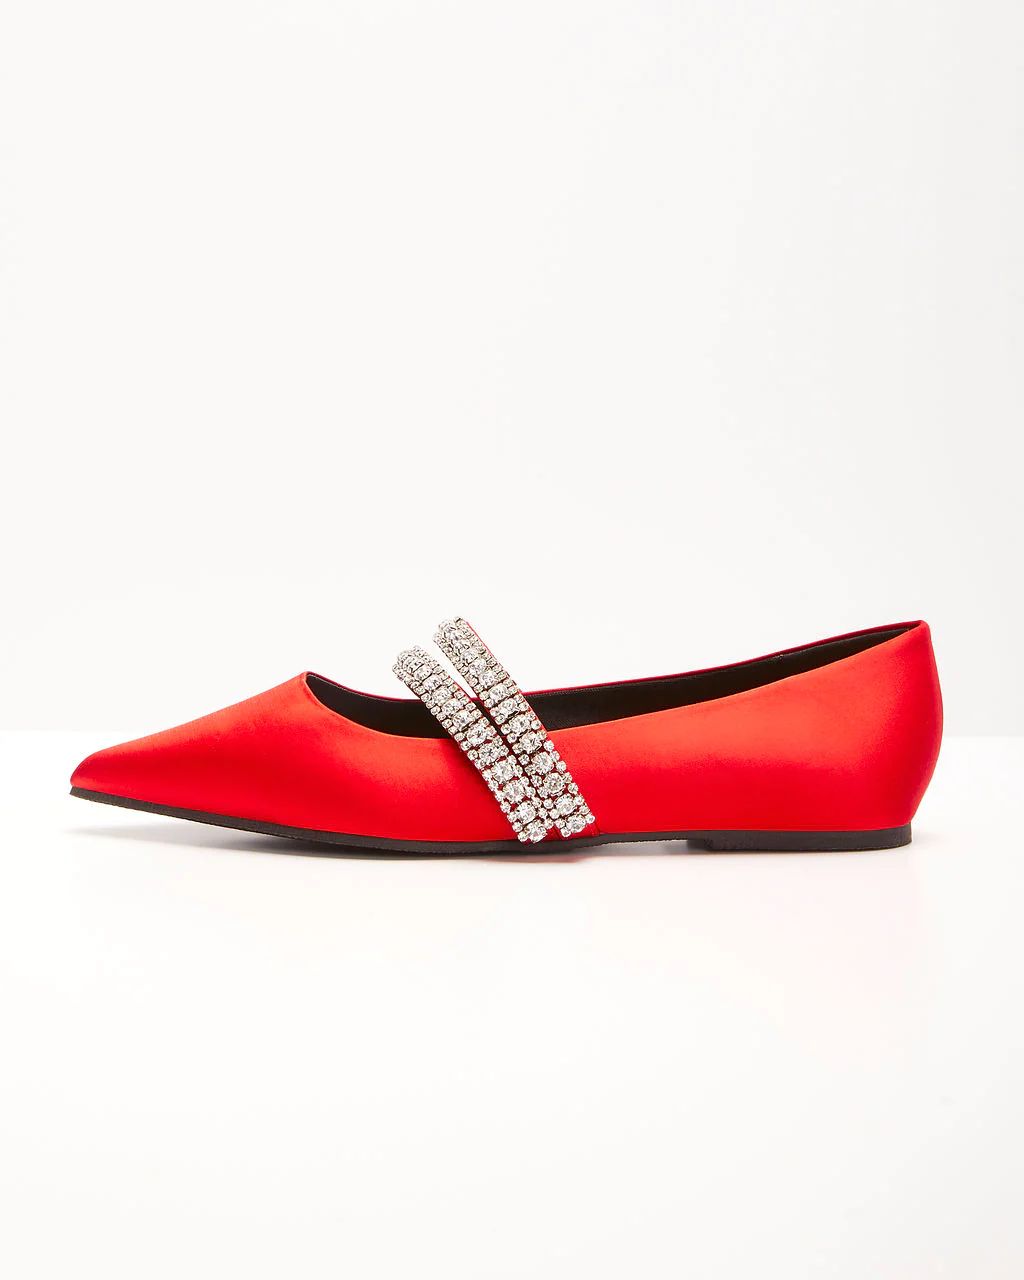 Spellbound Rhinestone Pointed Flats | VICI Collection